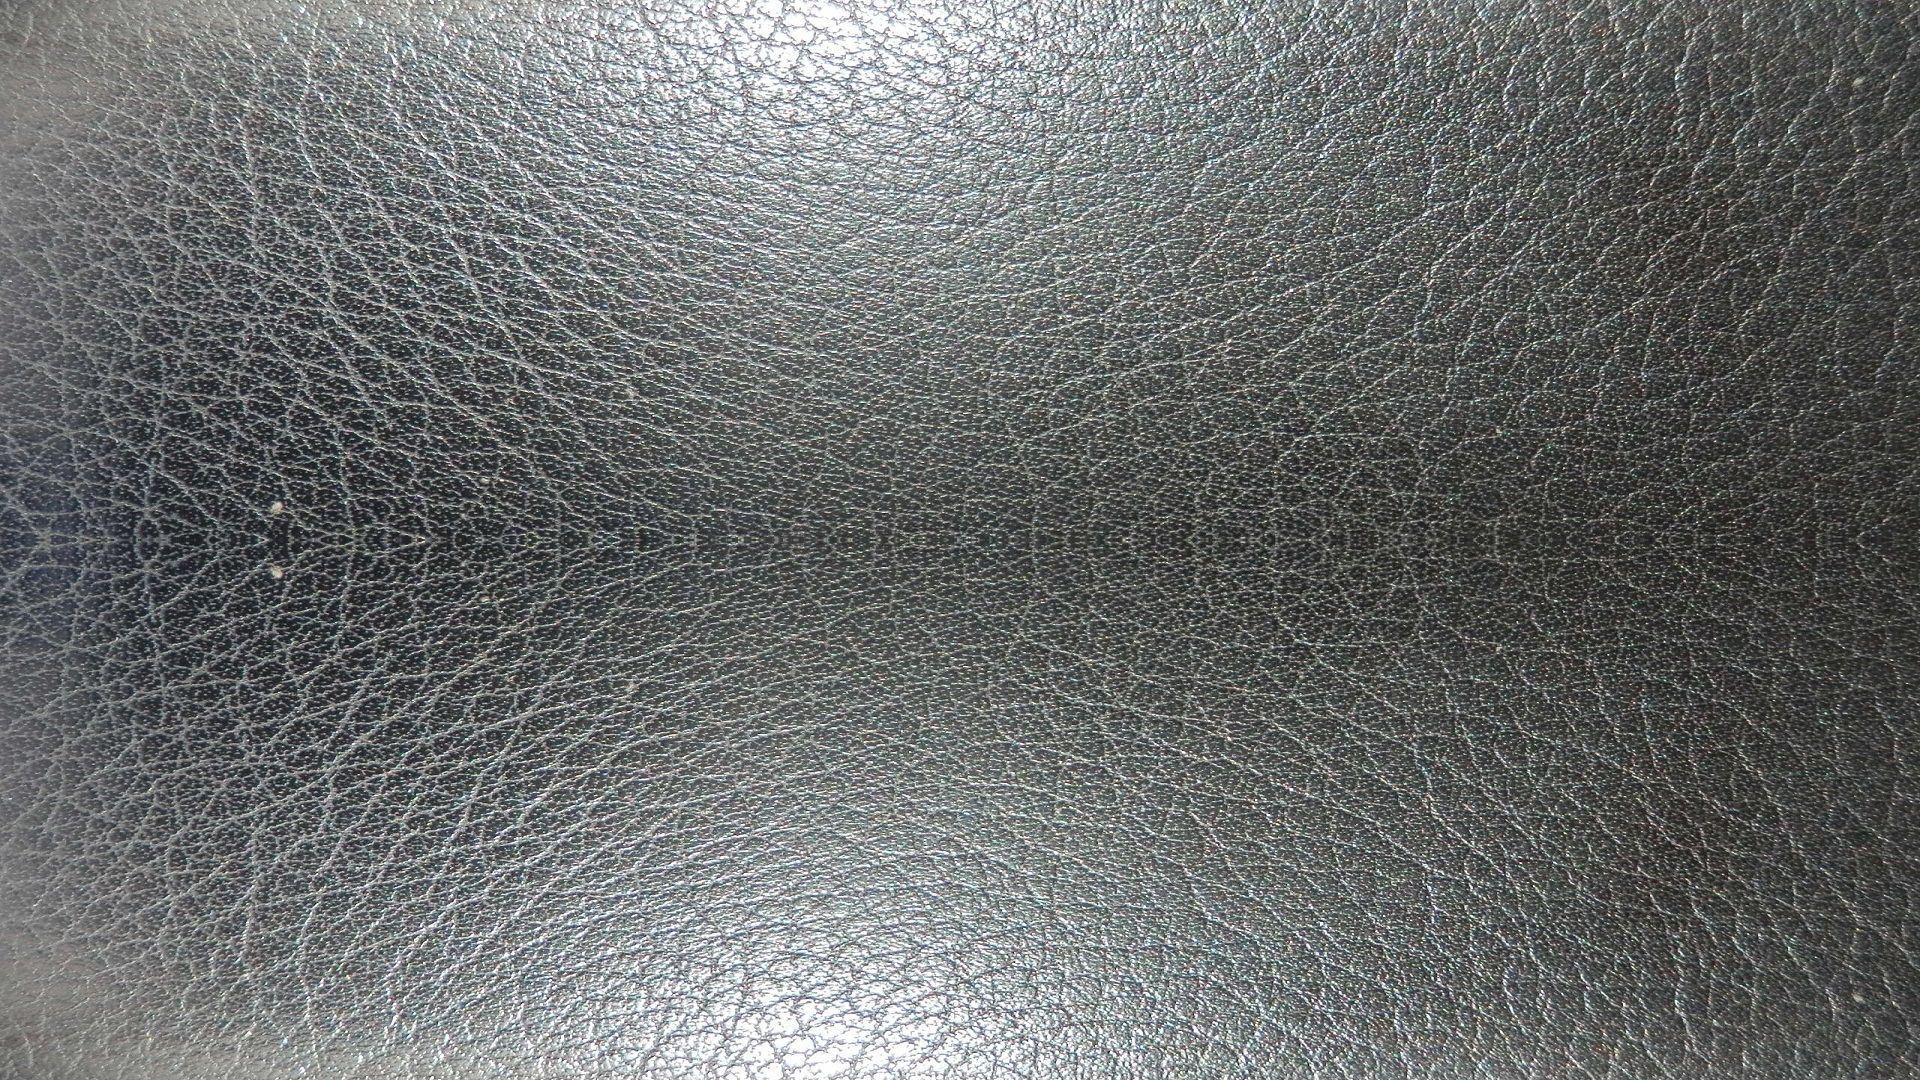 skin, silver, background, light, texture, textures, leather, silvery